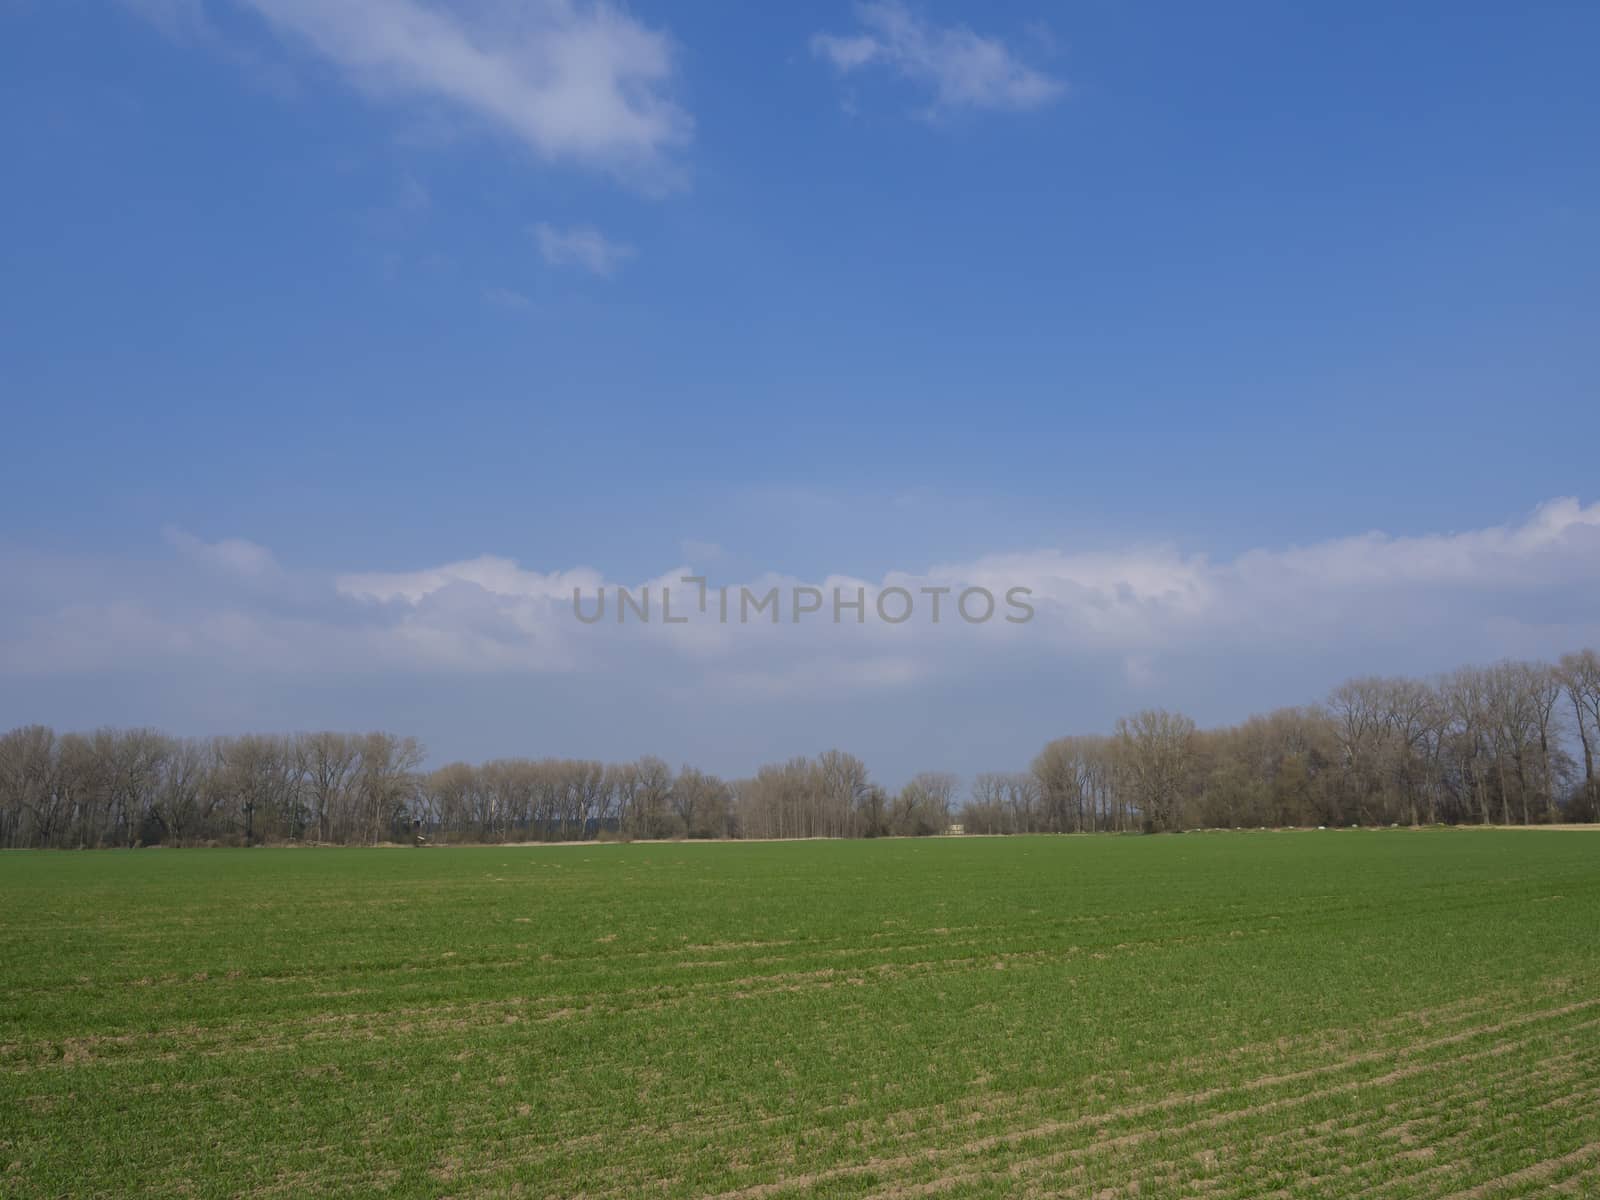 early spring  landscape with green sprouts sown field, bare trees and blue sky, white clouds backgroud, copy space, vivid colors